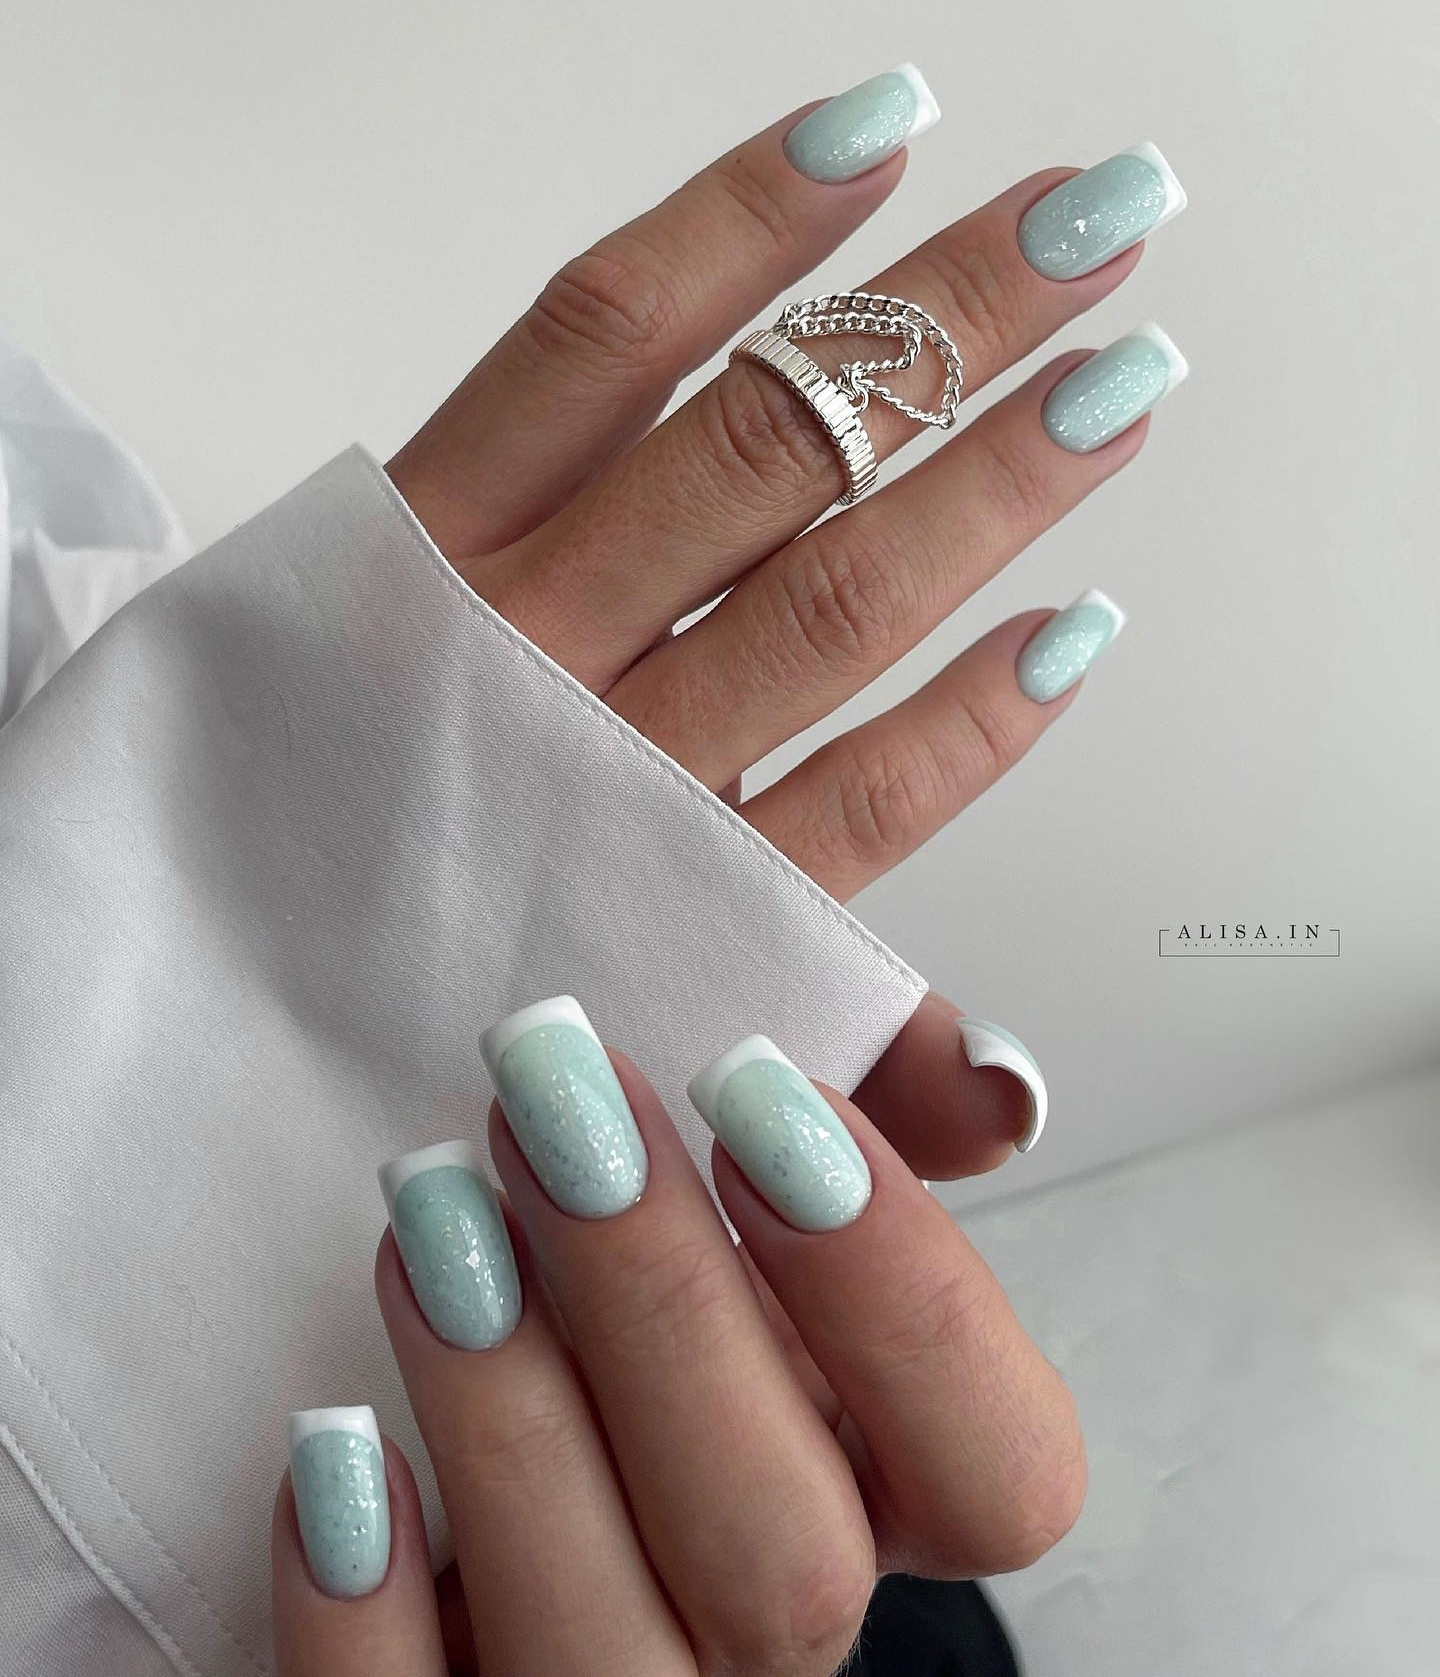 29 Summer Aesthetic Nails Designs 2021 : Baby Blue Abstract Nail Art